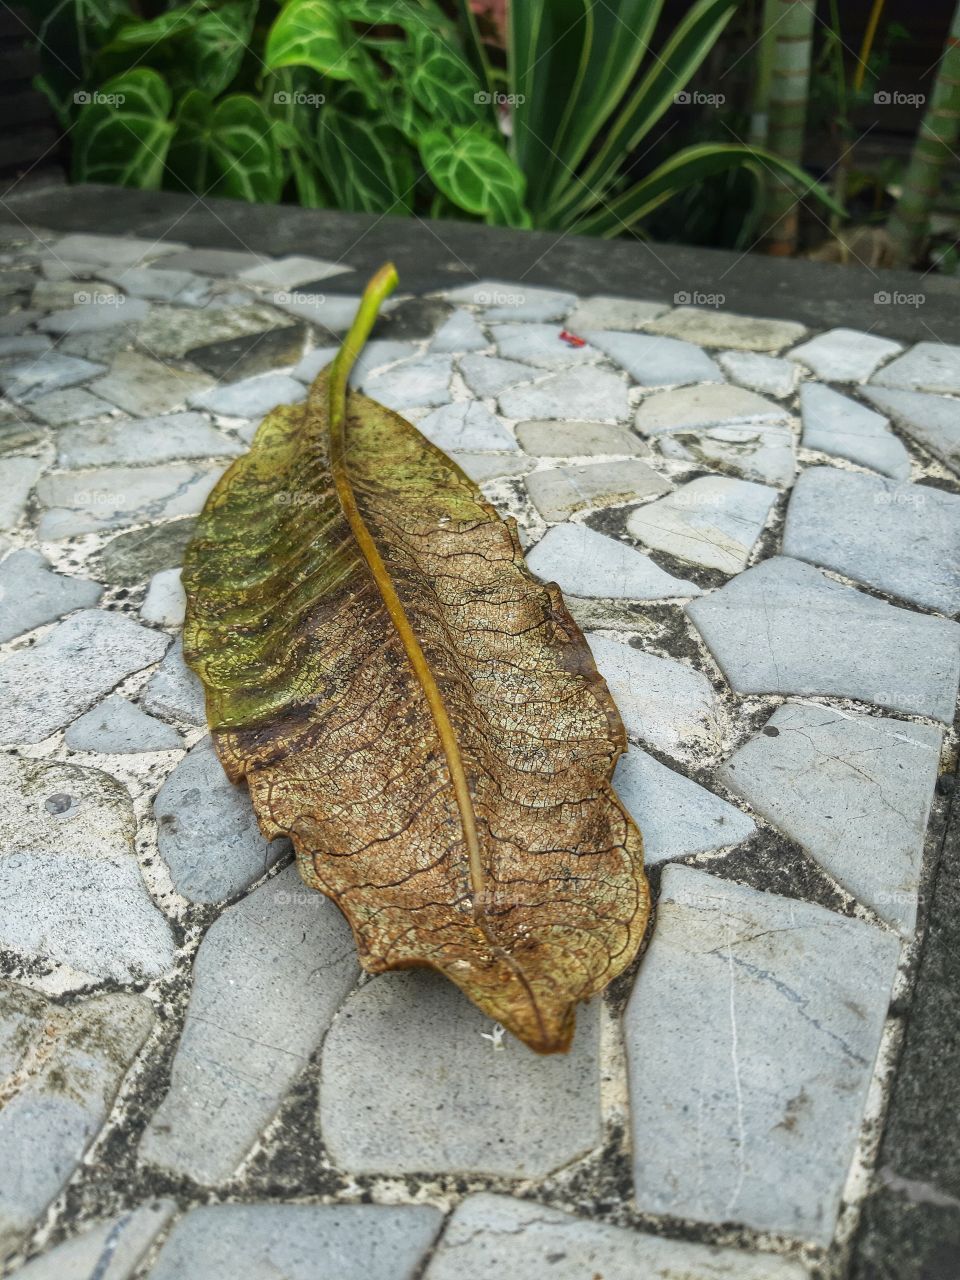 A single fallen old leaf lies on the ground